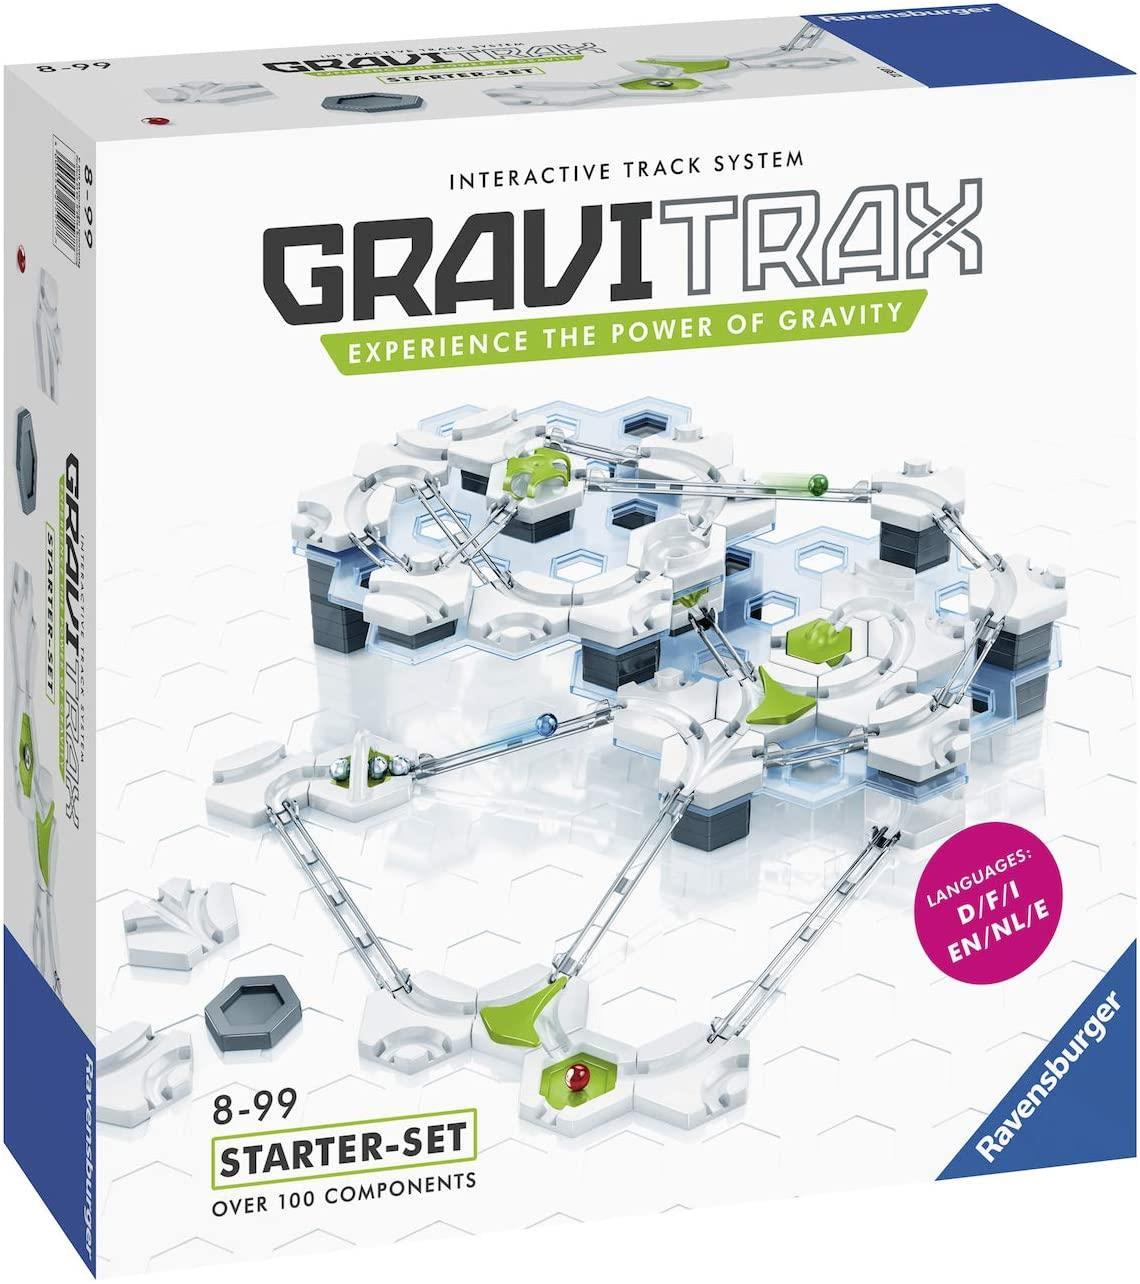 Marble Run & STEM Toy for Boys & Girls Age 8 & Up Ravensburger GraviTrax FlexTube Accessory Accessory for 2019 Toy of The Year Finalist Gravitrax 